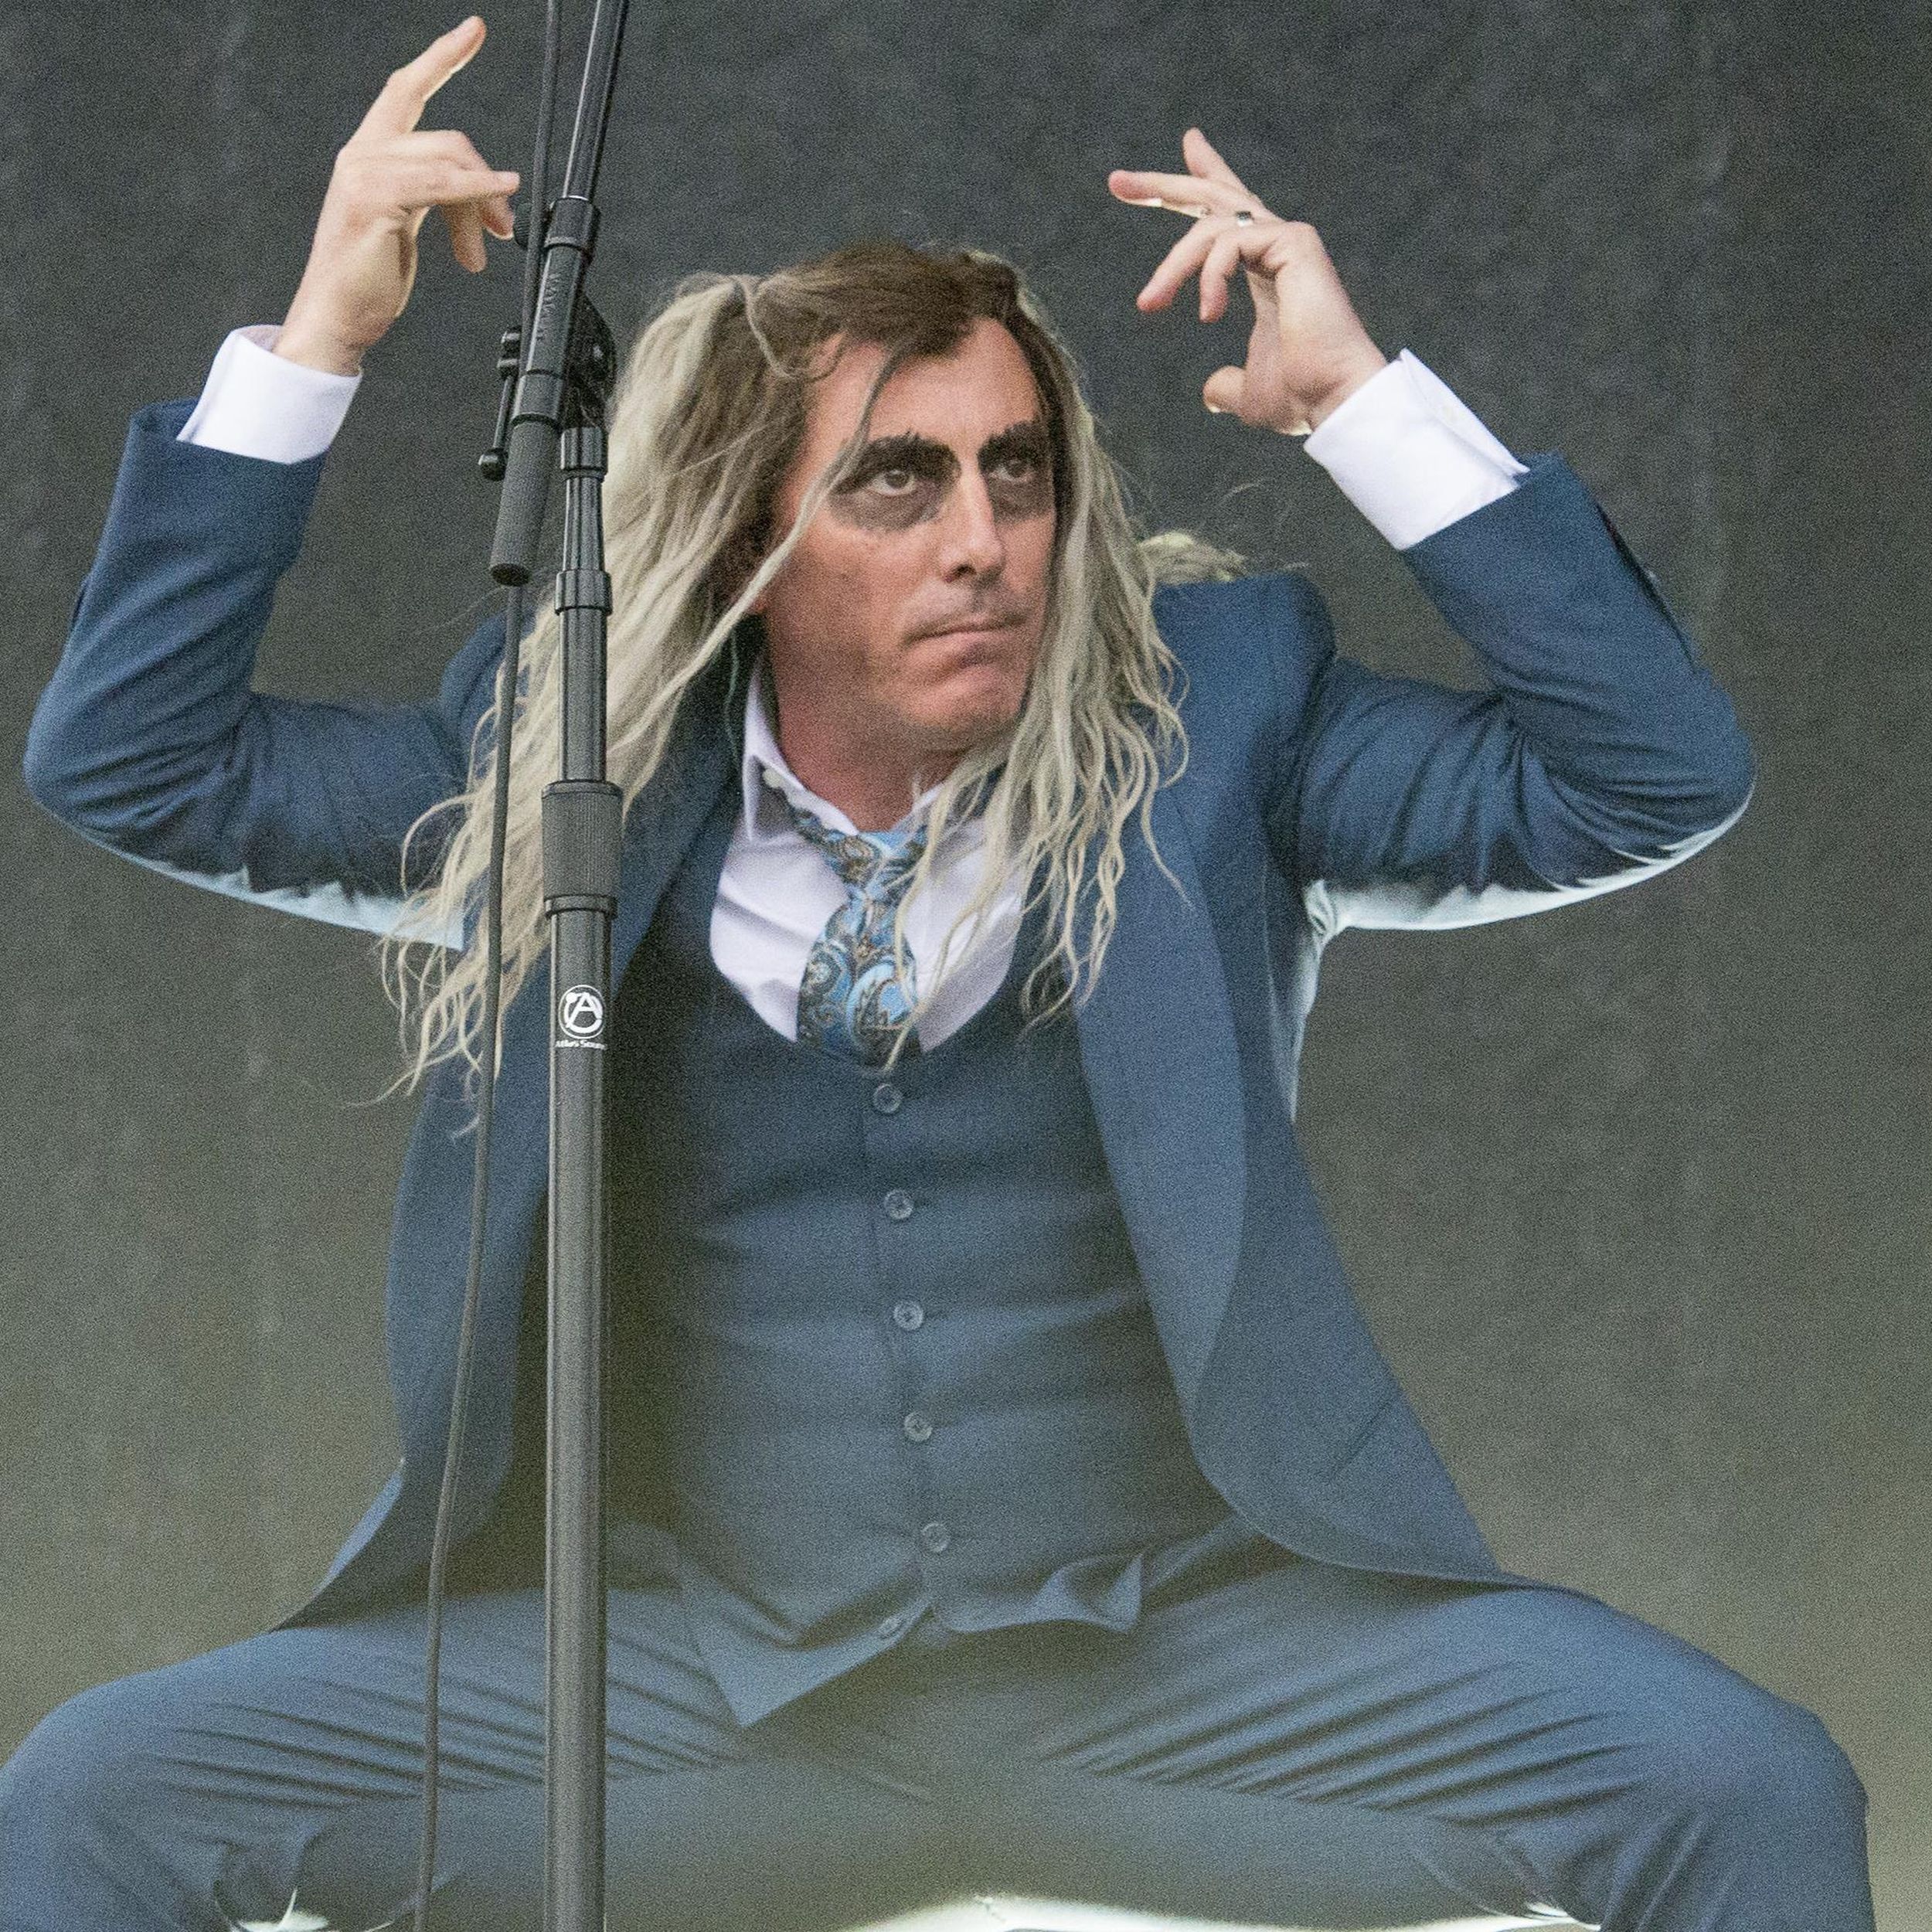 Review: Tool offers impeccable musicianship, eye-popping stage in